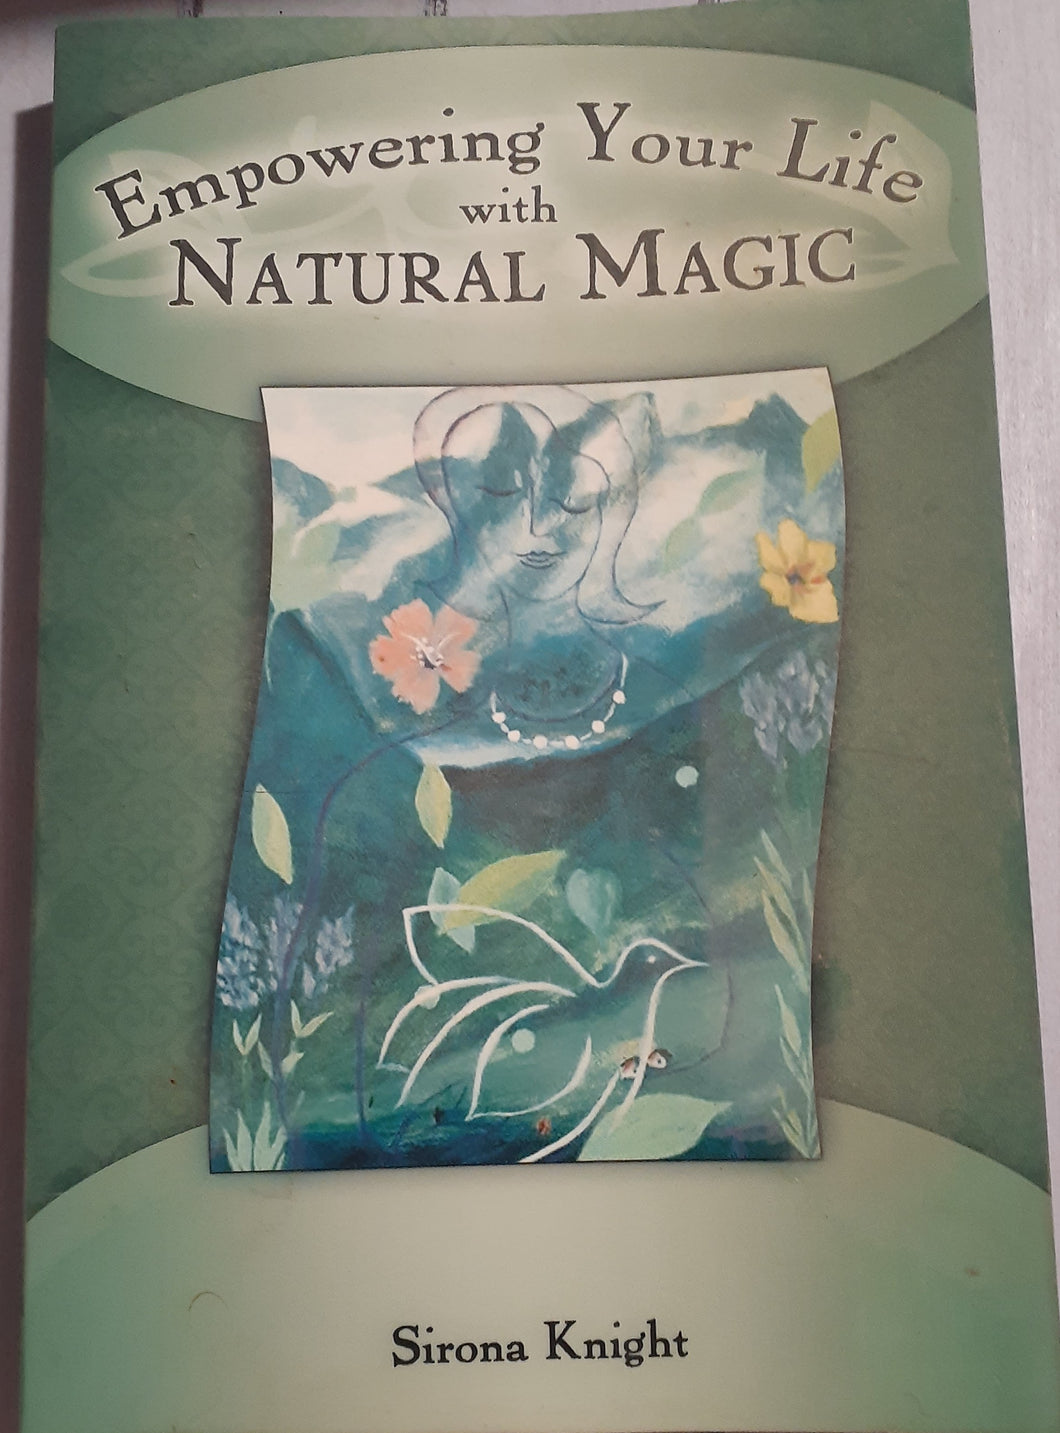 Empowering Your Life with Natural Magic